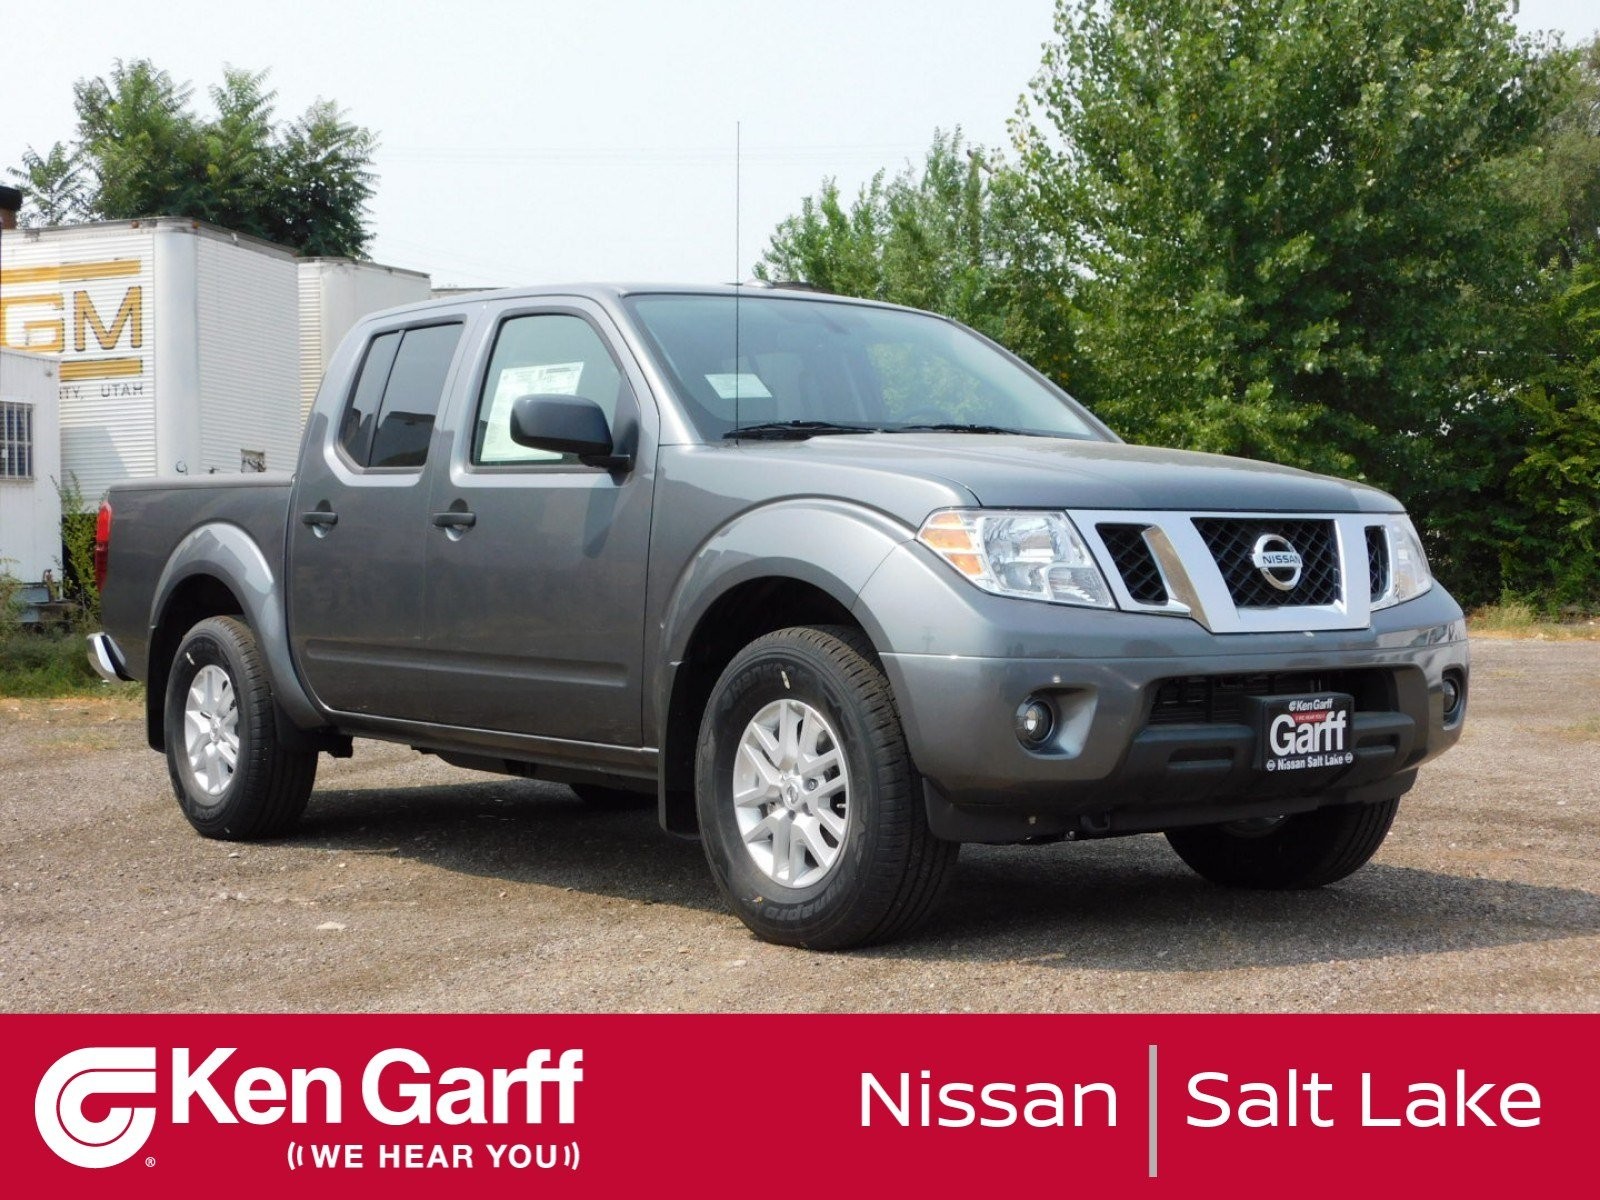 Nissan Truck Parts Diagram New 2018 Nissan Frontier Sv V6 Crew Cab Pickup In Salt Lake City Of Nissan Truck Parts Diagram